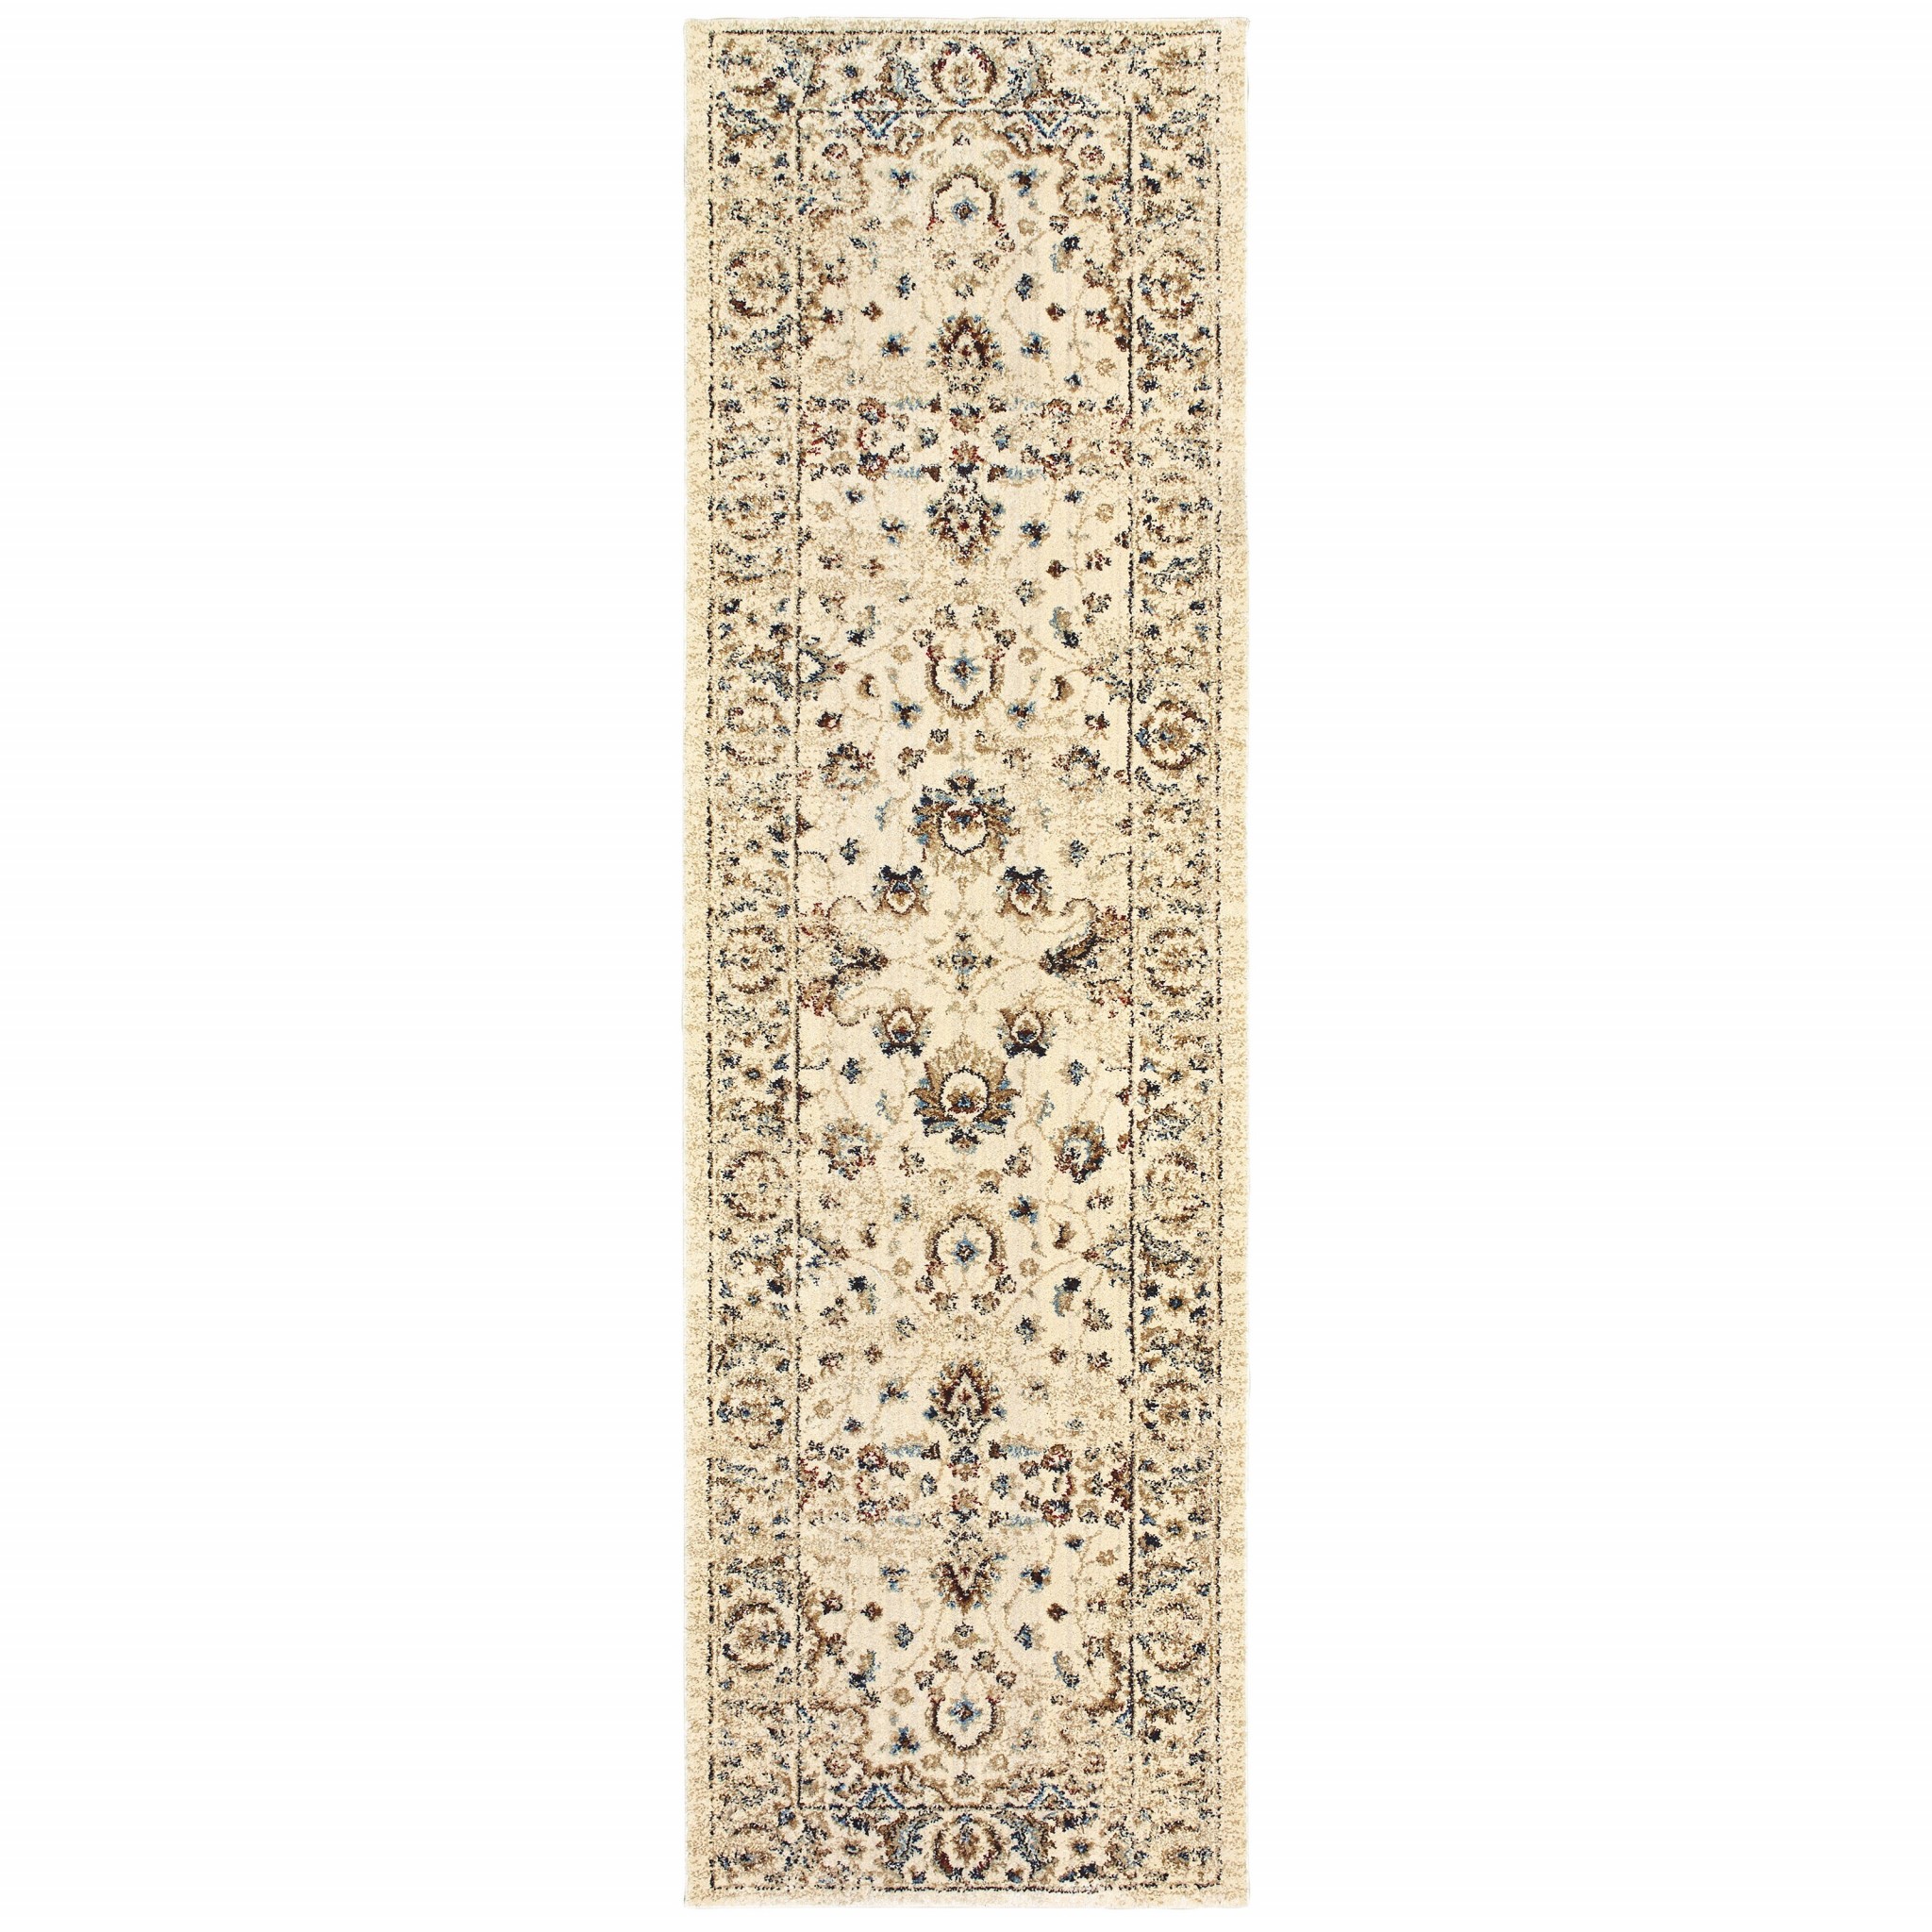 2’ X 8’ Ivory And Gold Distressed Indoor Runner Rug-388181-1